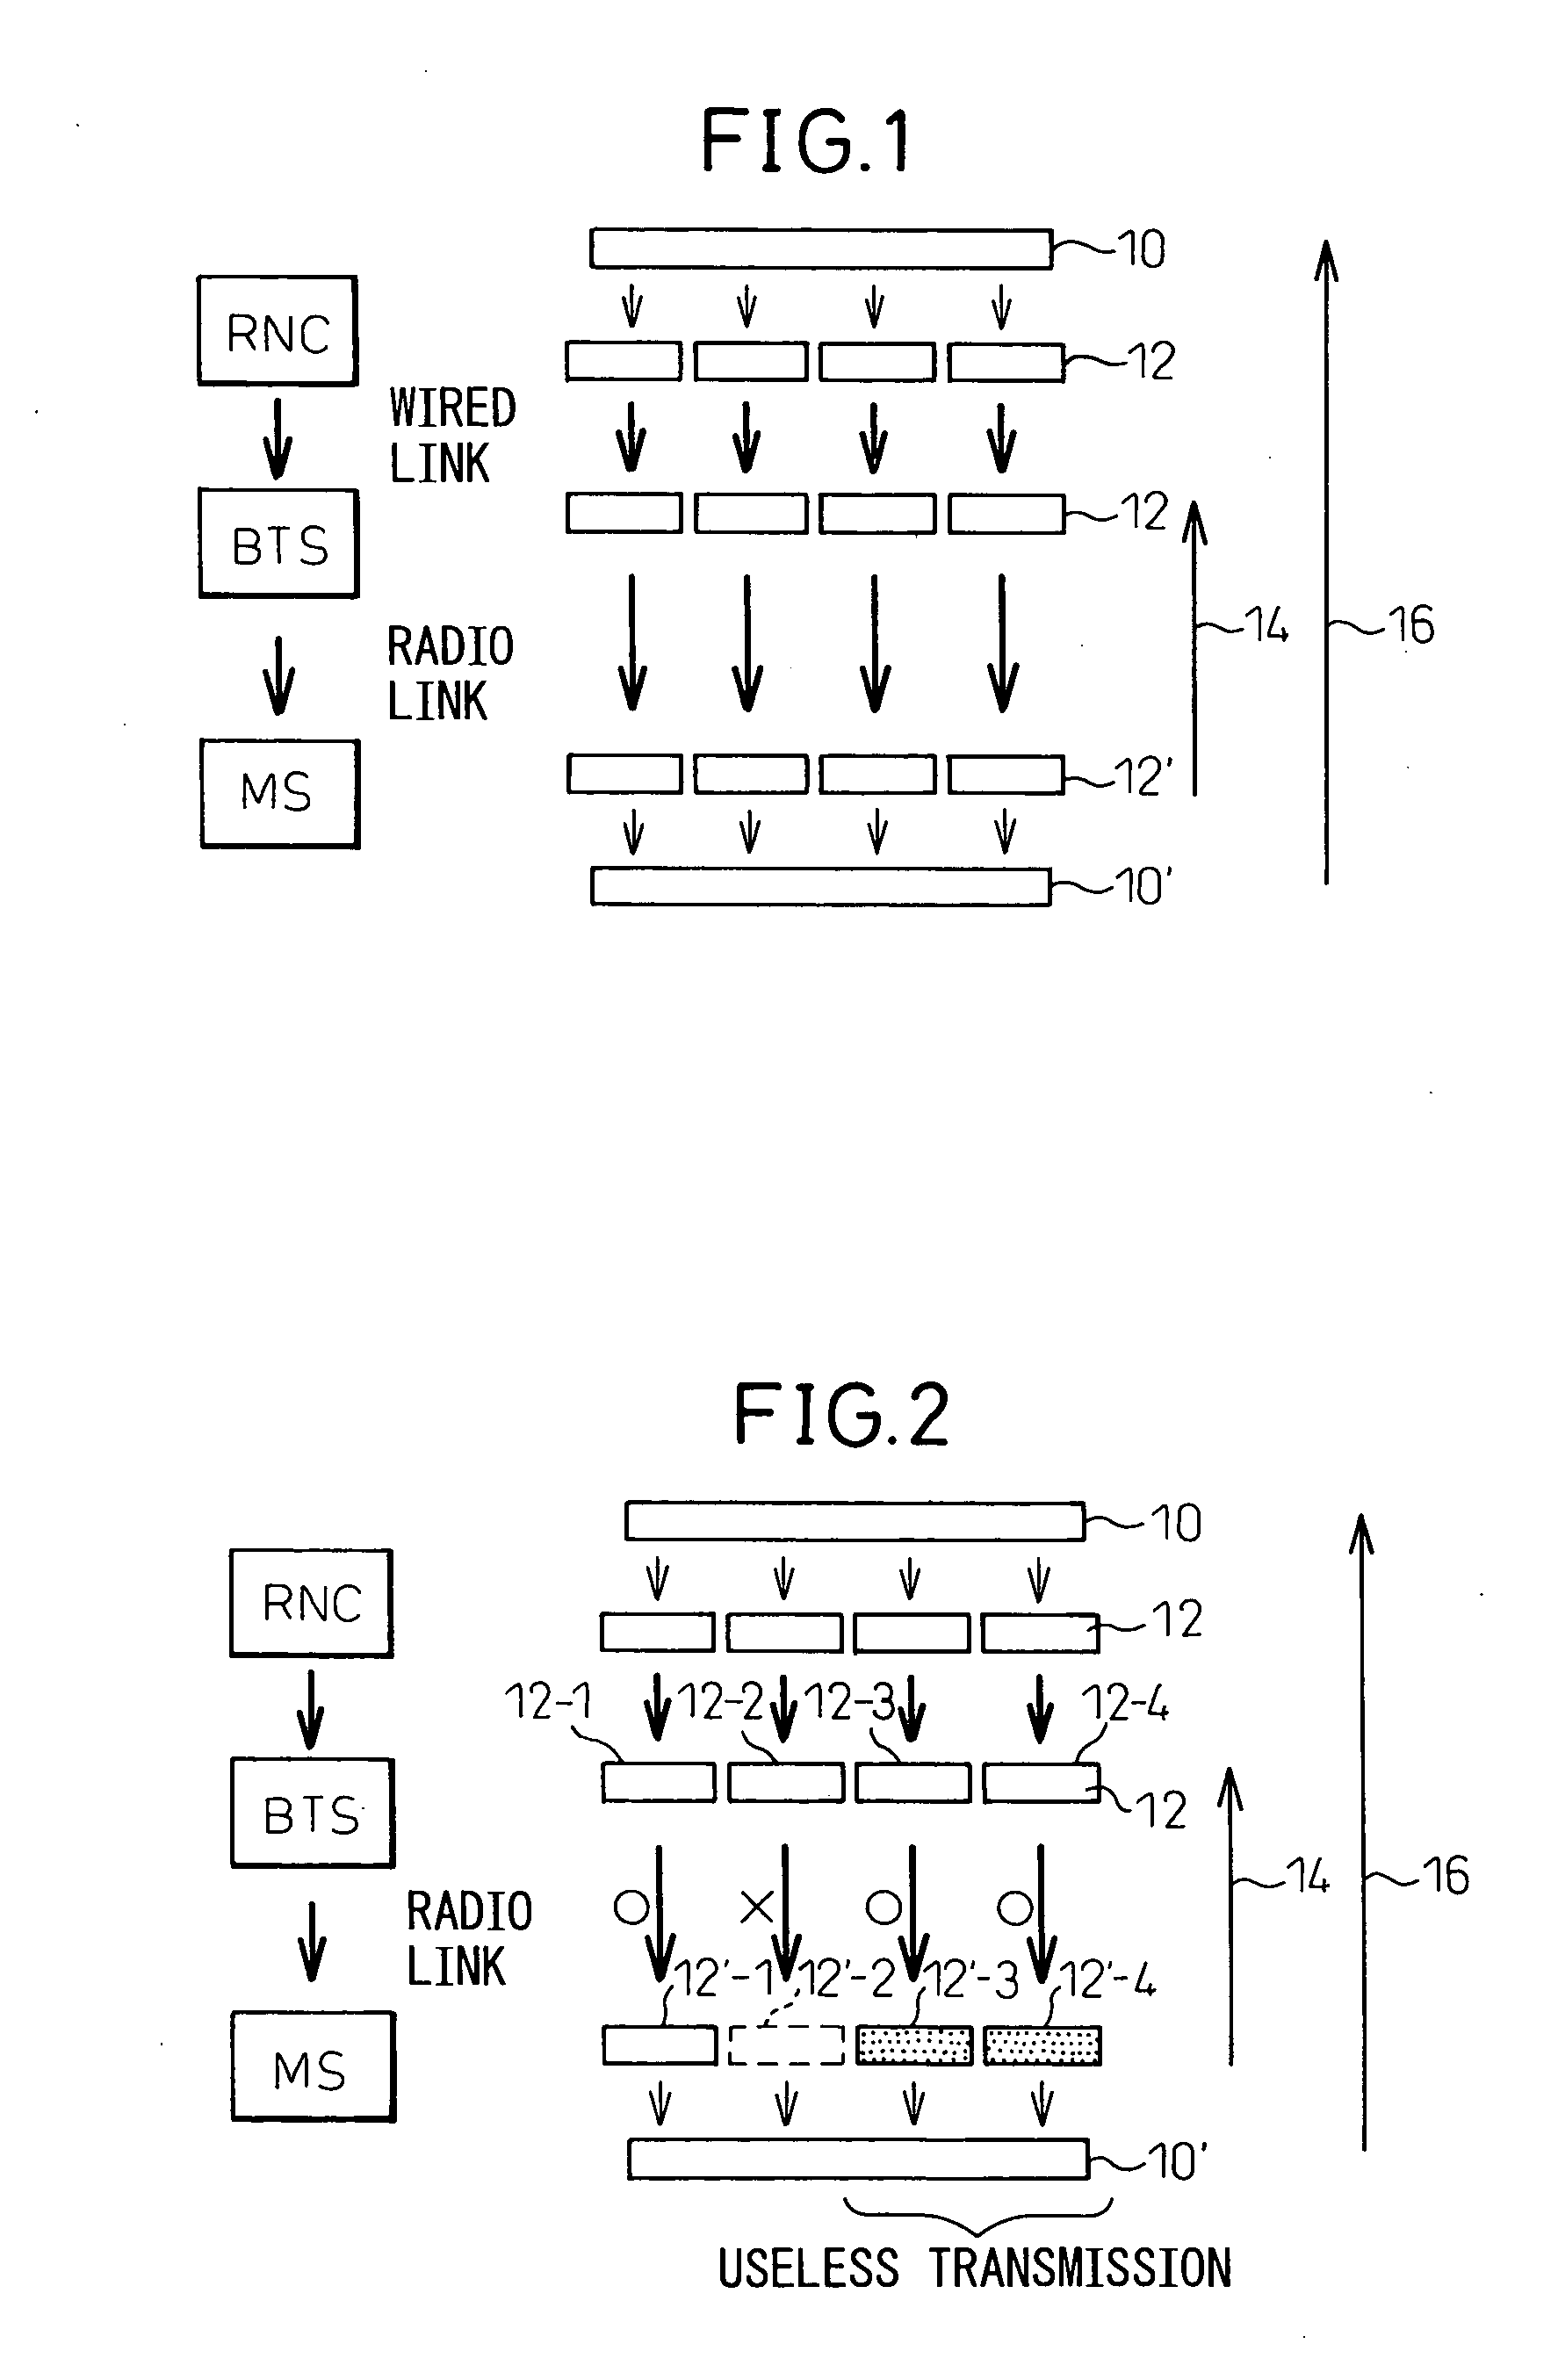 Packet transmission apparatus